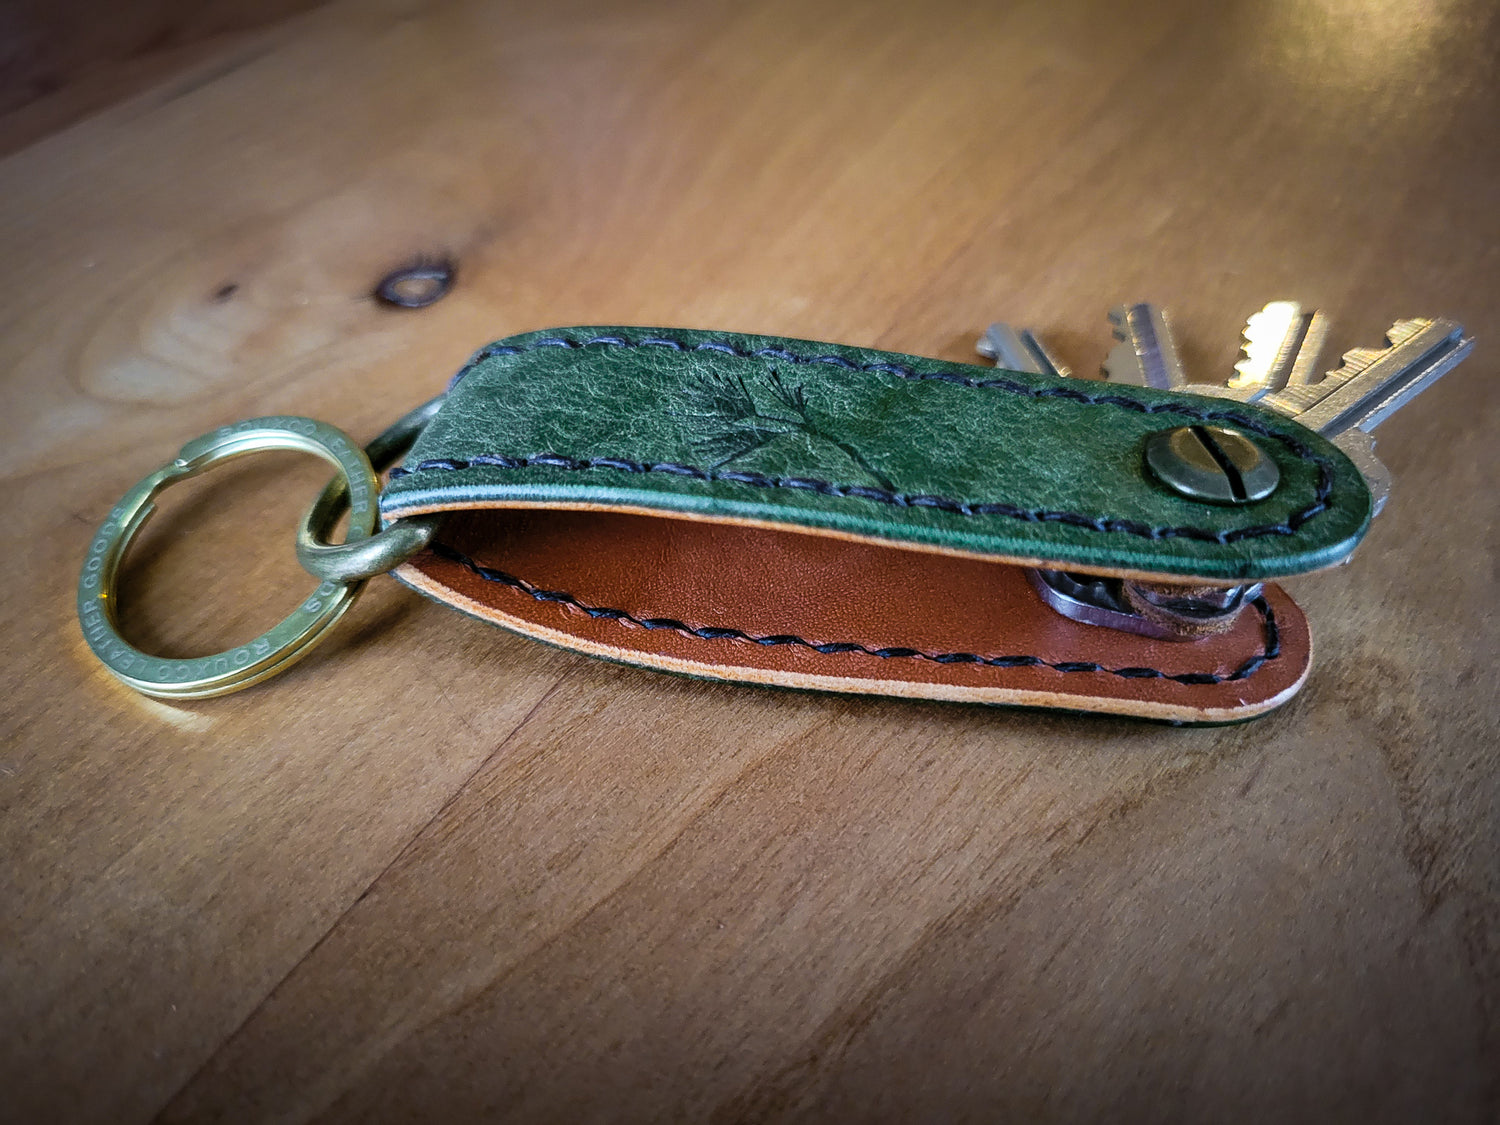 Green and Brown Leather EDC Key Organizer stitched with brown thread holding 4 keys. laying open on wood table.